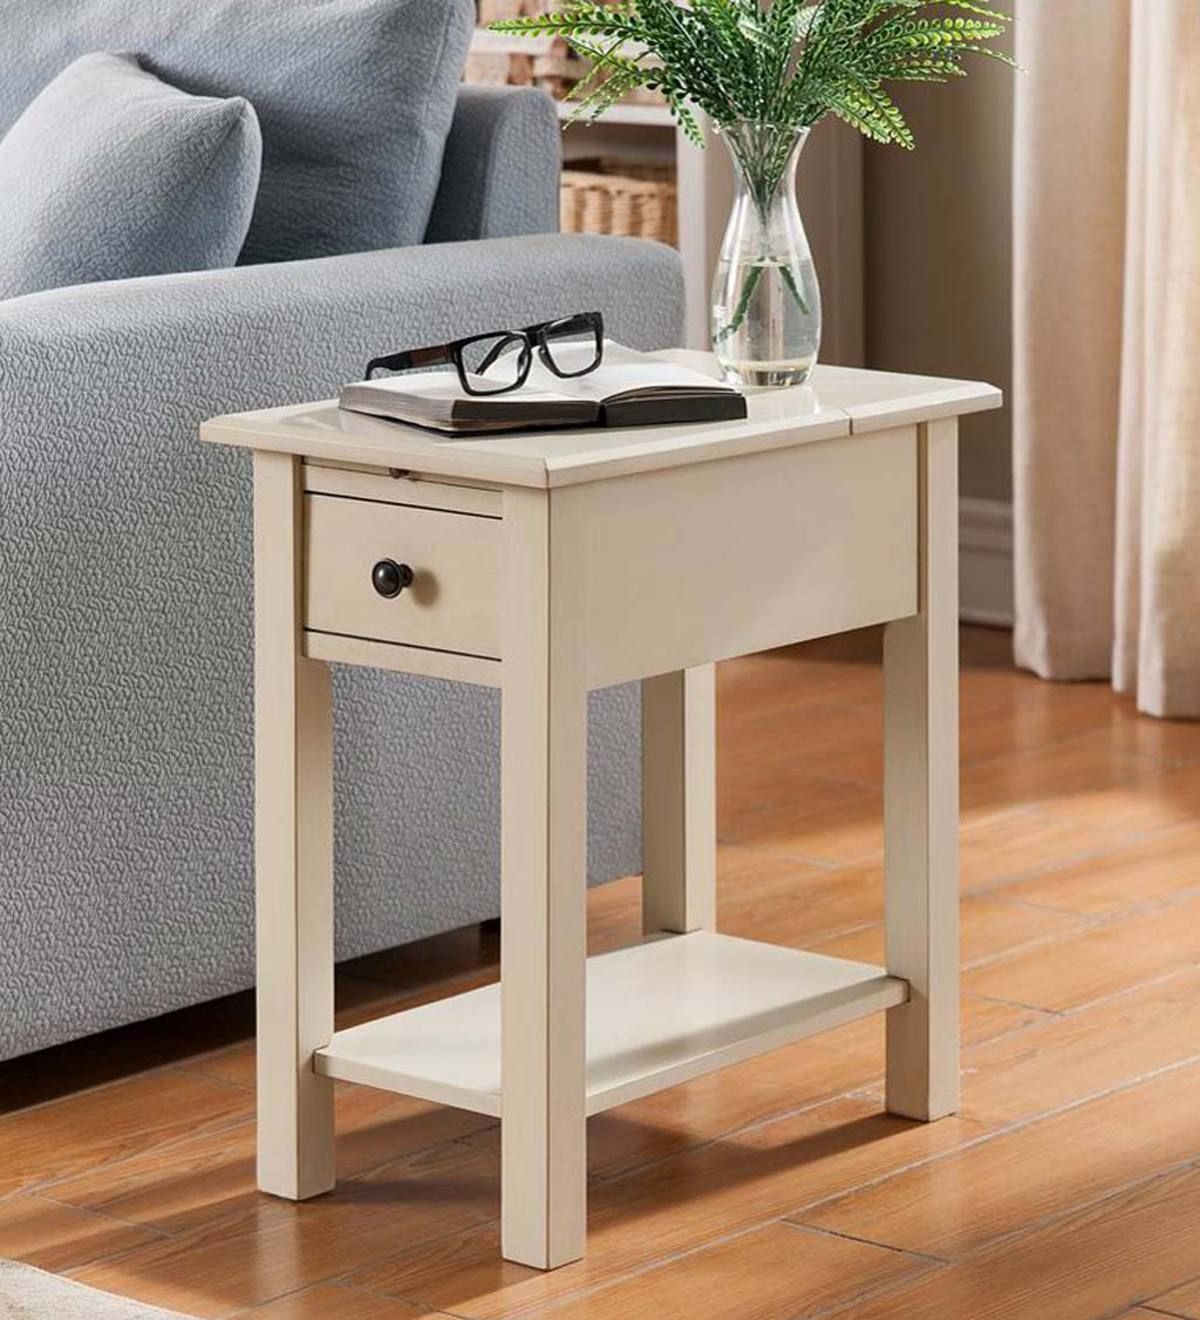 Benton Side Table With Charging Station – Black | Plowhearth In Coffee Tables With Charging Station (View 4 of 15)